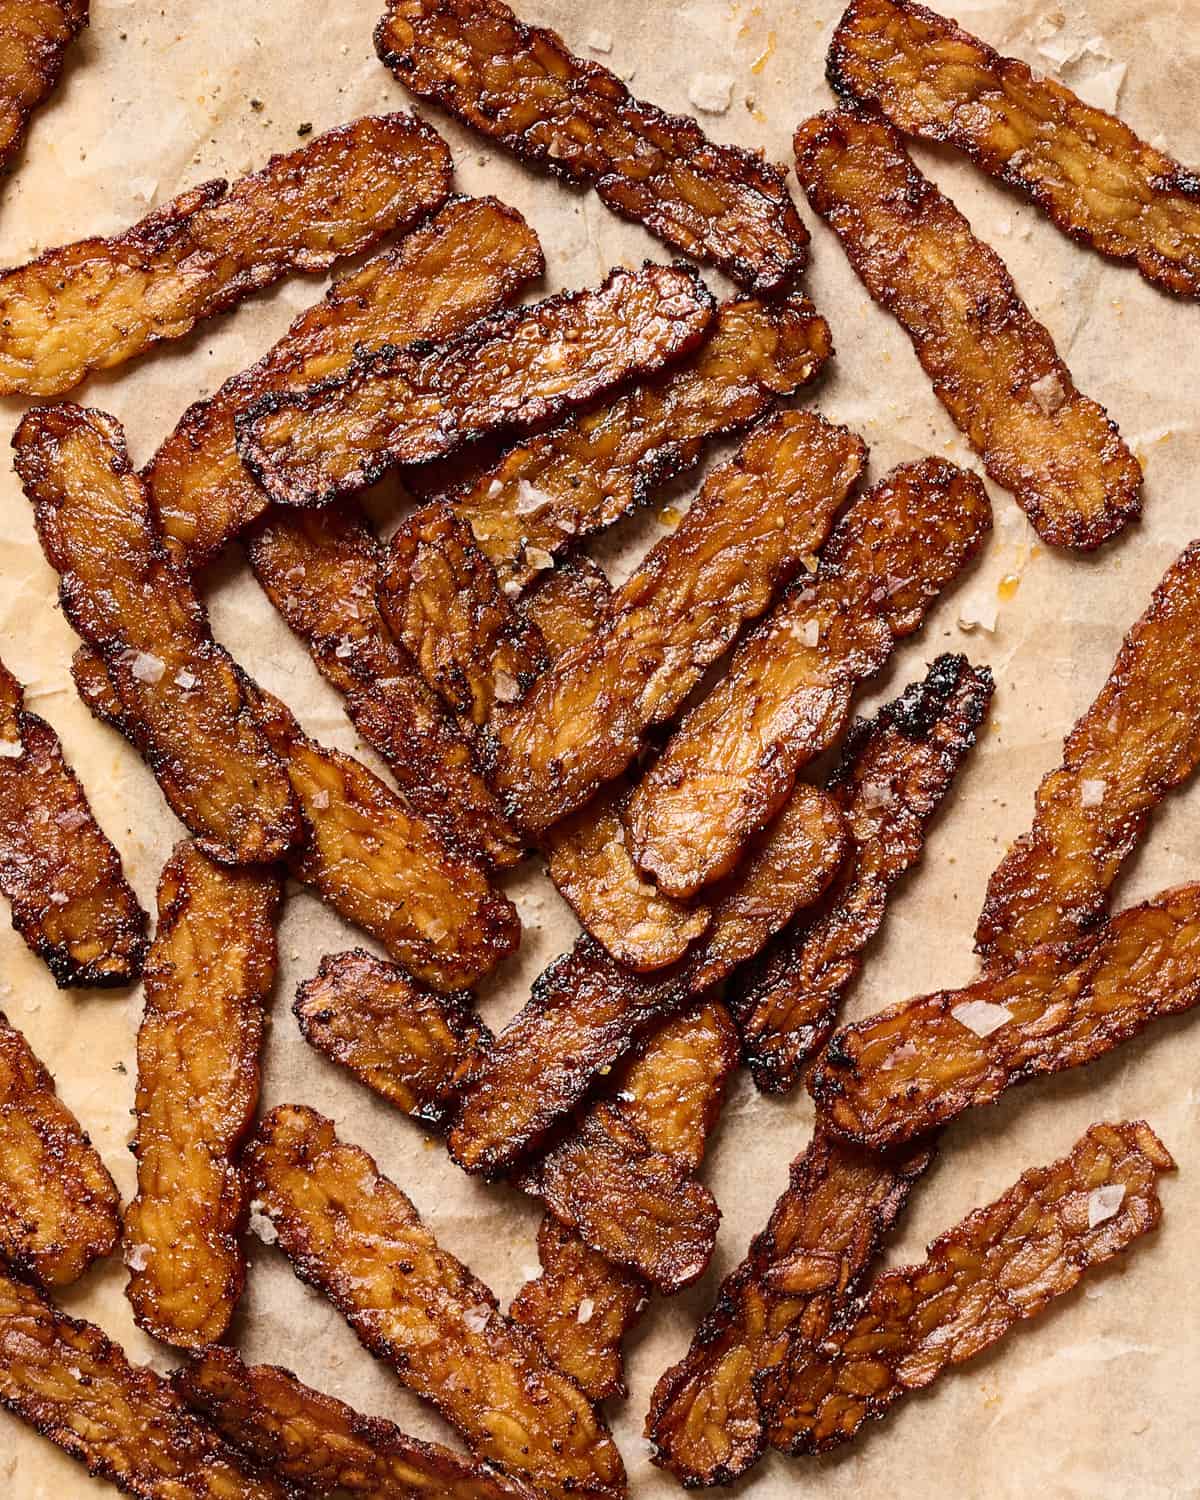 Crispy browned tempeh bacon slices on a piece of parchment paper.